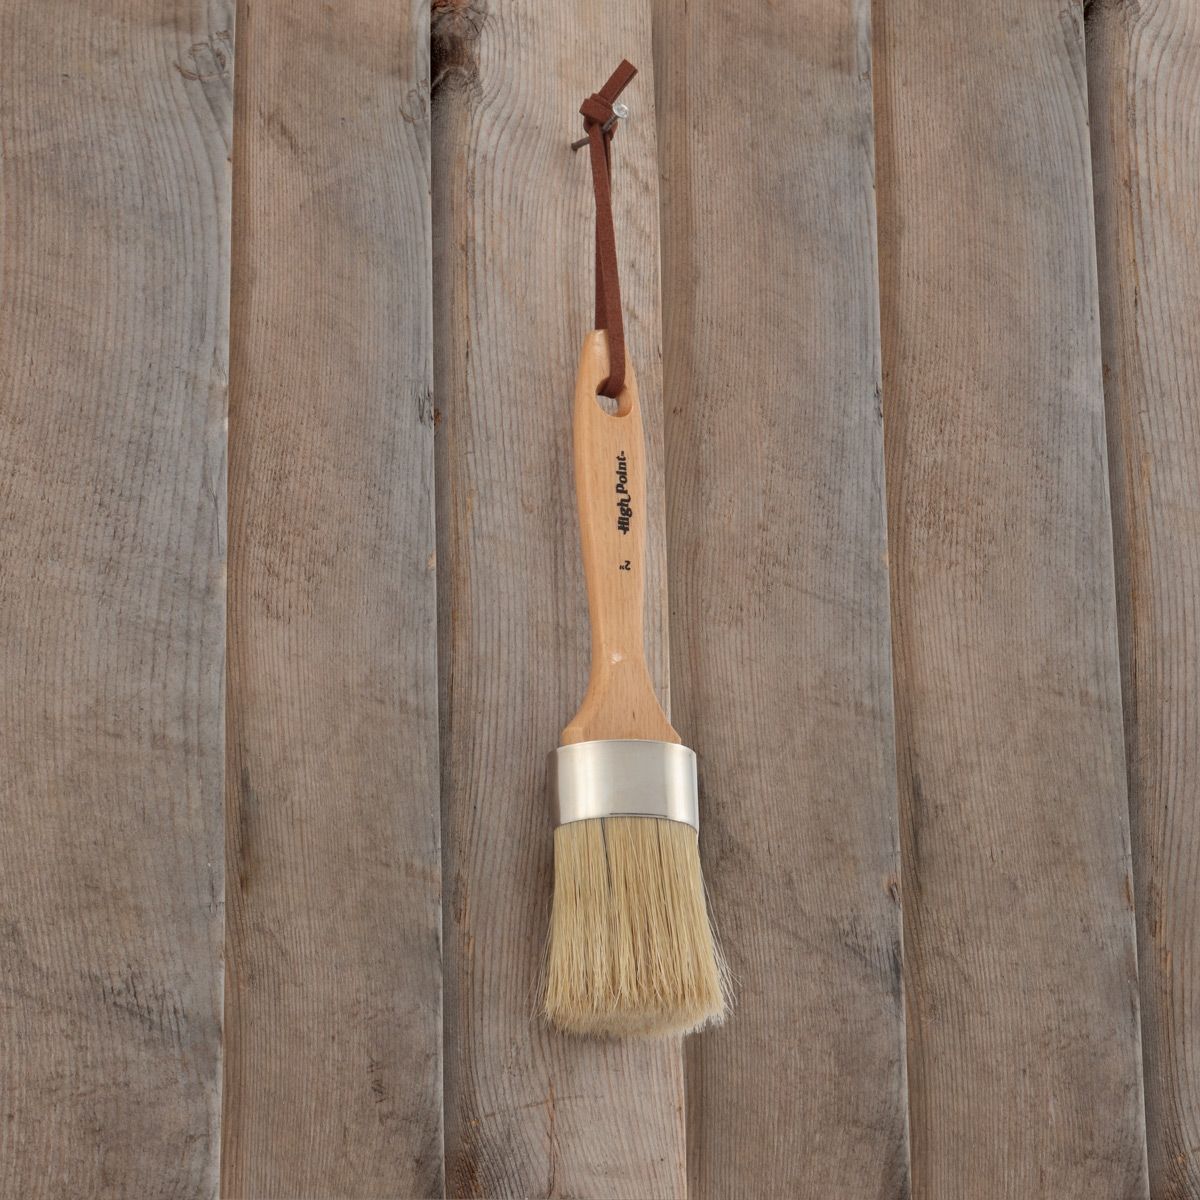 Easy to hold varnished beech wood 5.7" handle with hanging hole and strap